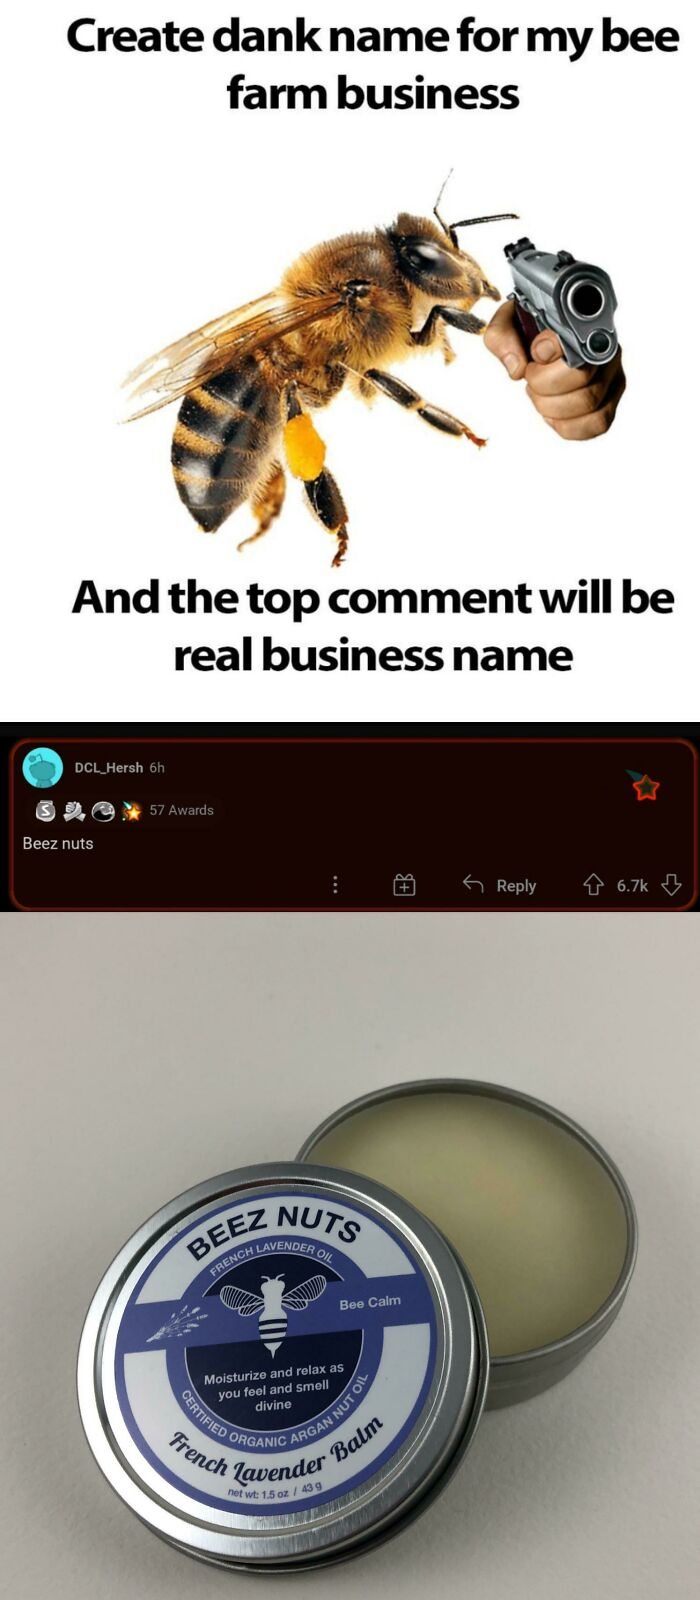 Power Moves - Create dank name for my bee farm business And the top comment will be real business name